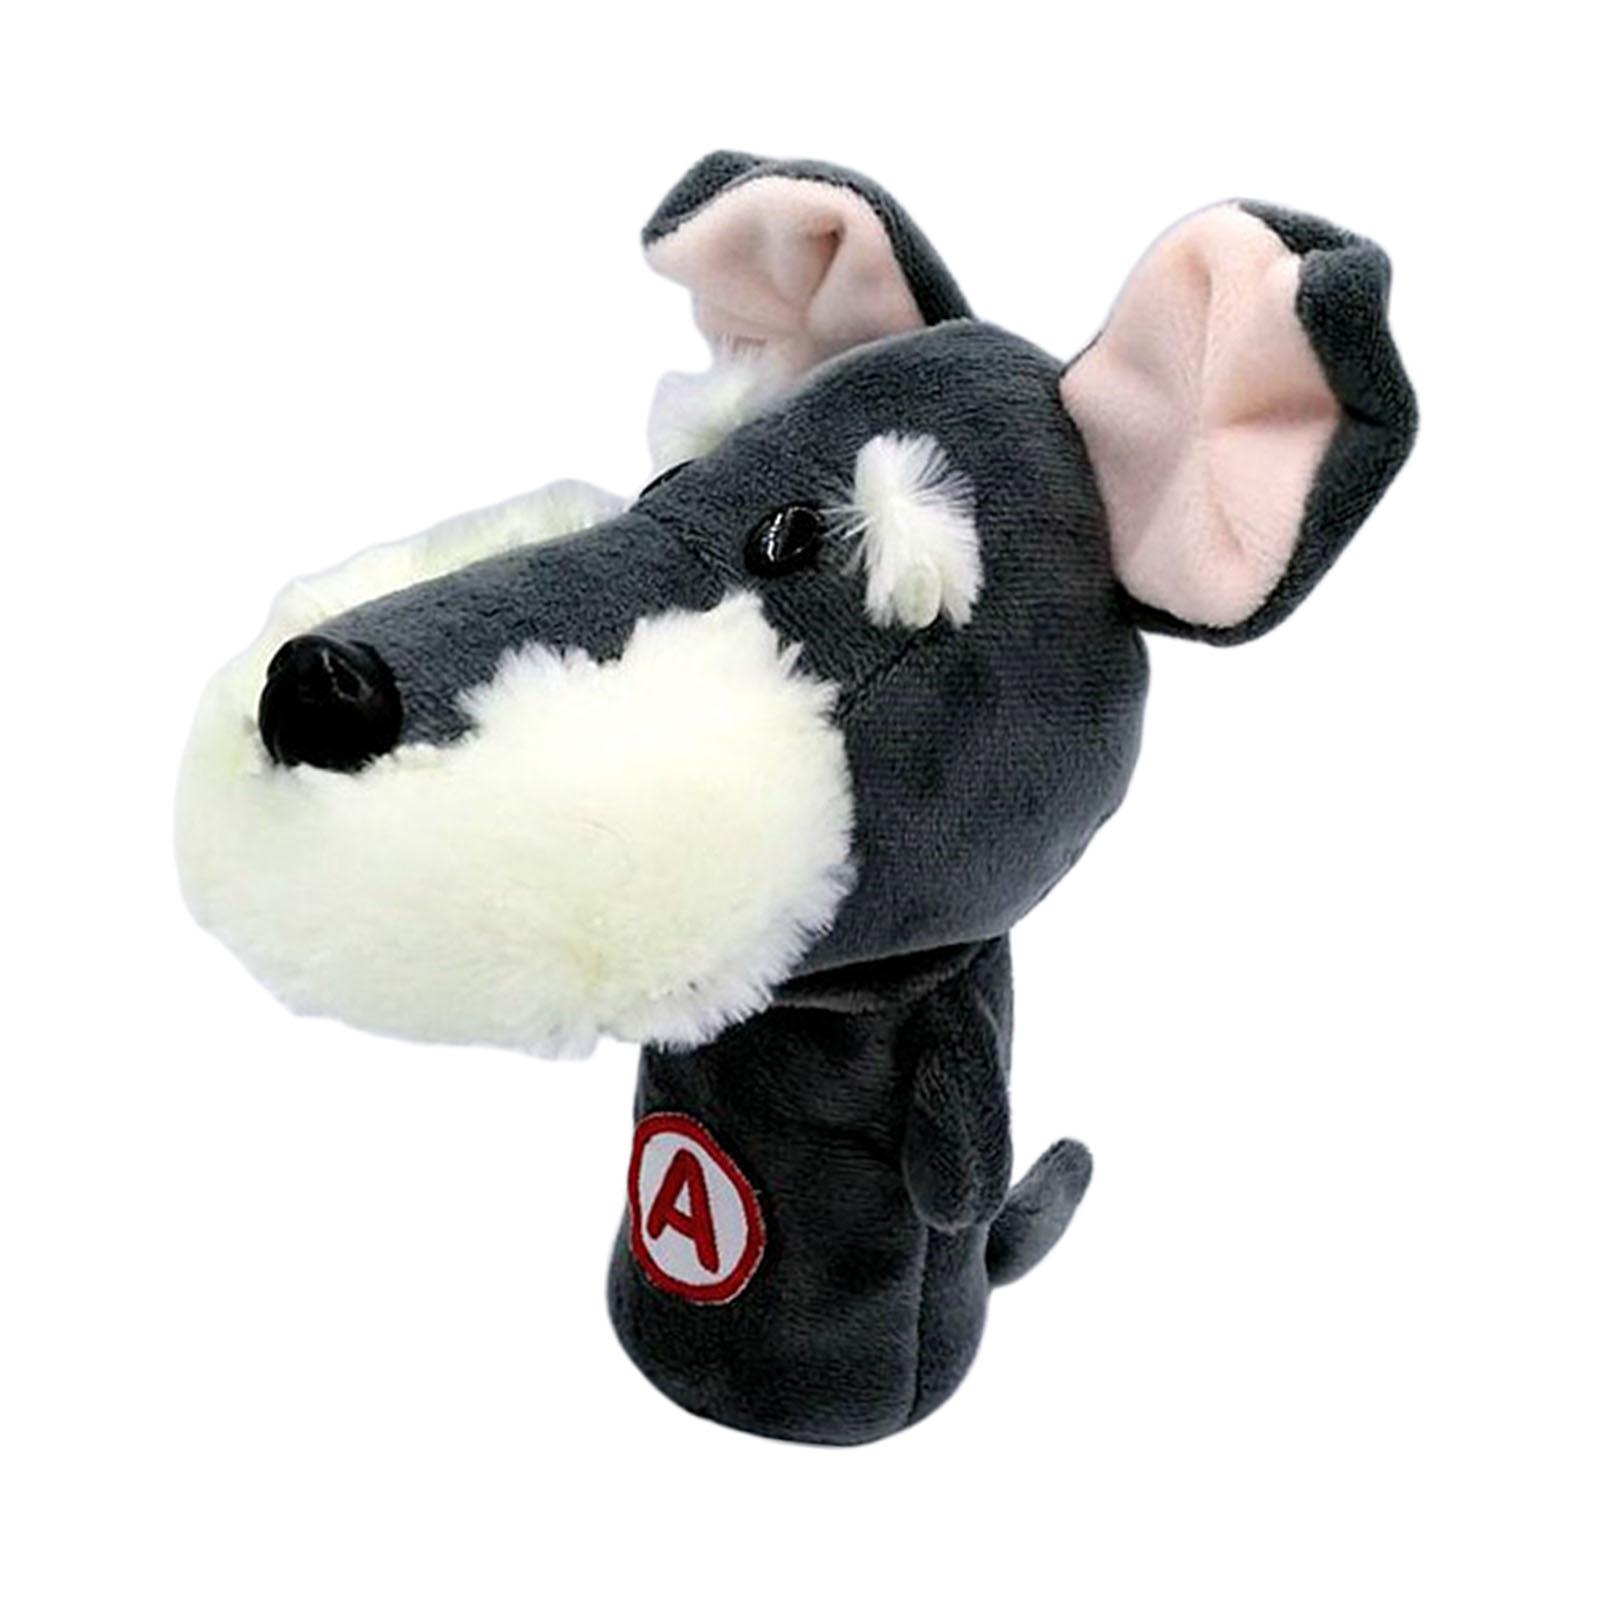 Novelty Plush Animal Golf Iron Headcover Wedges Club Head Cover Dog No.A